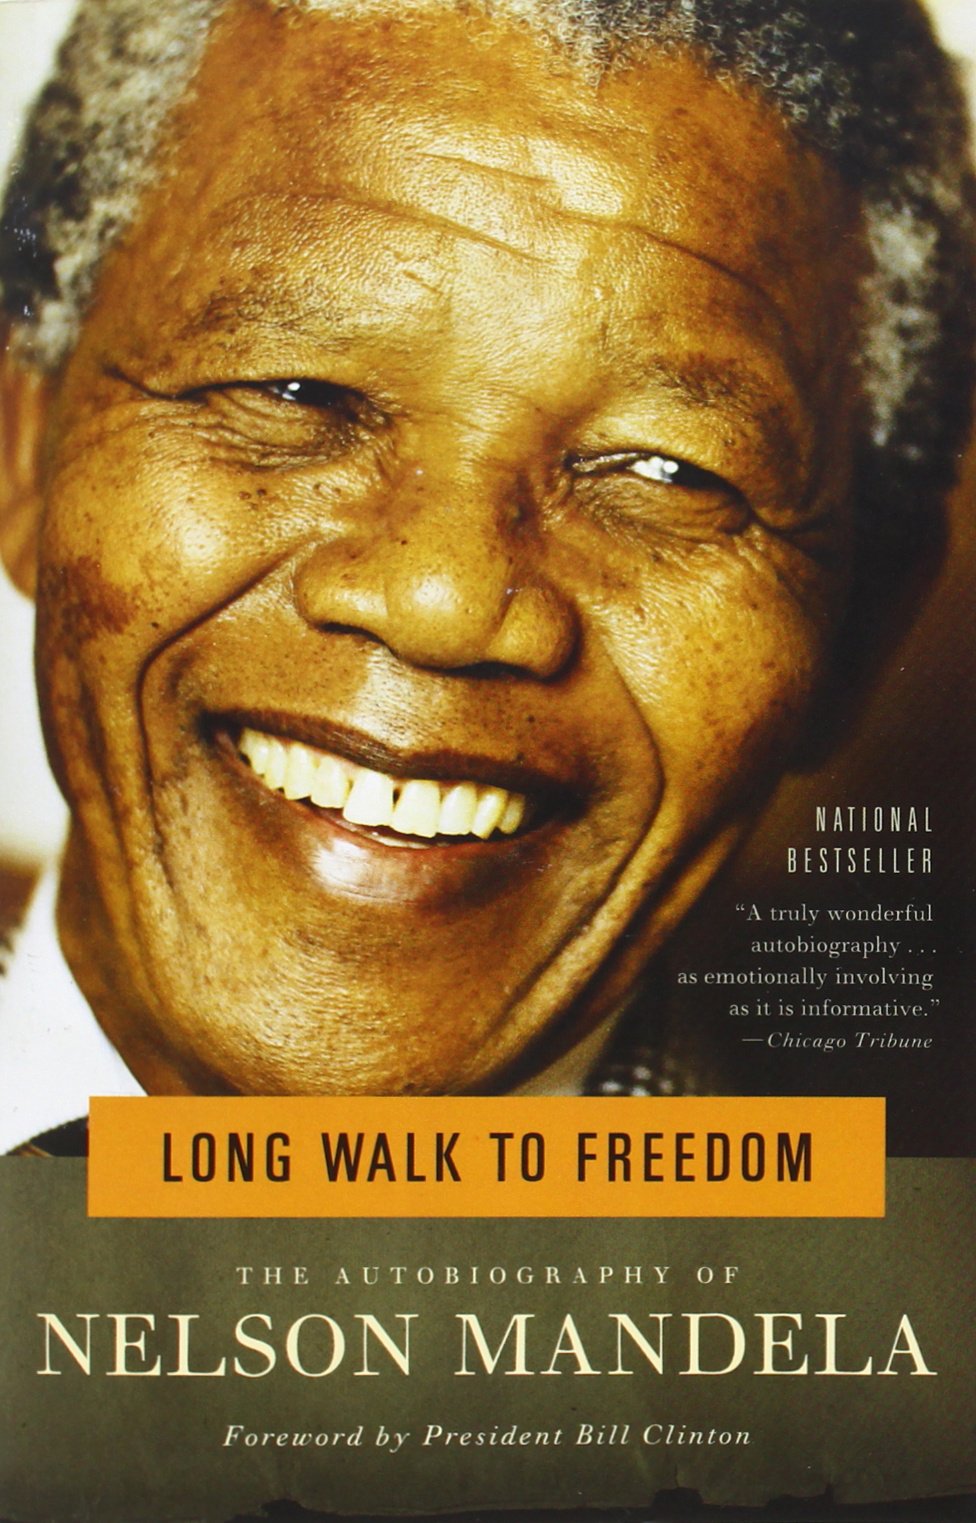 A Long Walk to Freedom: The Autobiography of Nelson Mandela